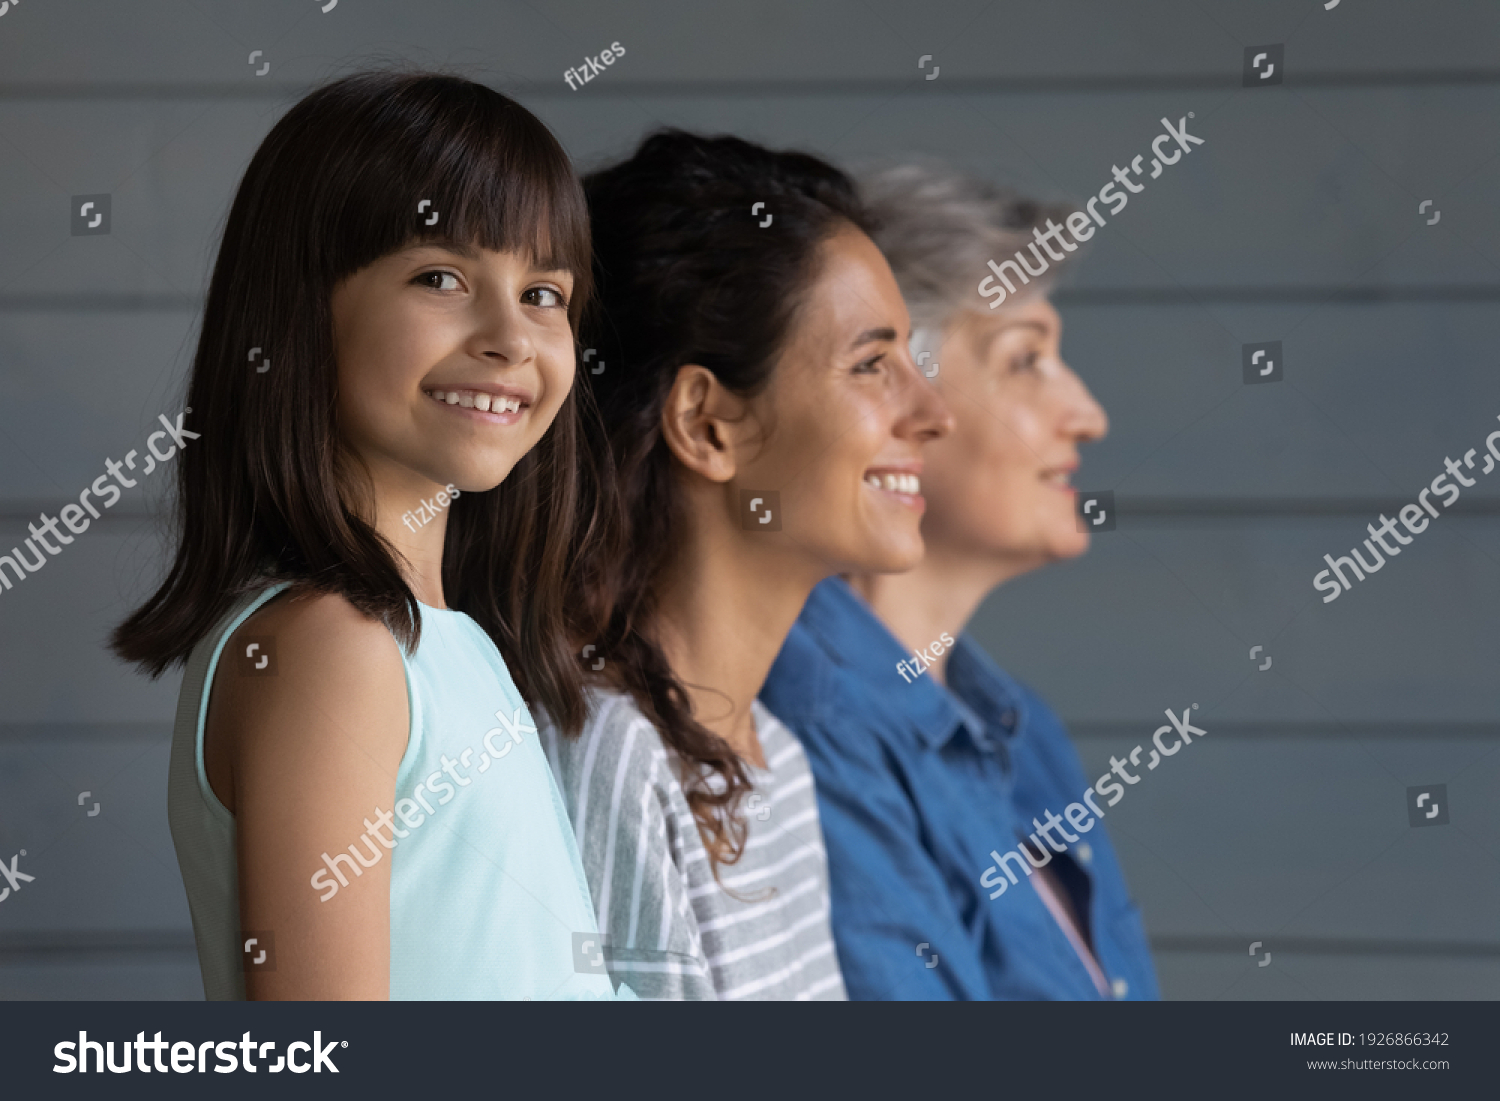 Portrait of happy little Hispanic 7s girl child look at camera smiling, mom and grandmother on background look in distance. Growing generation or small Latino kid with mother and senior grandparent. #1926866342